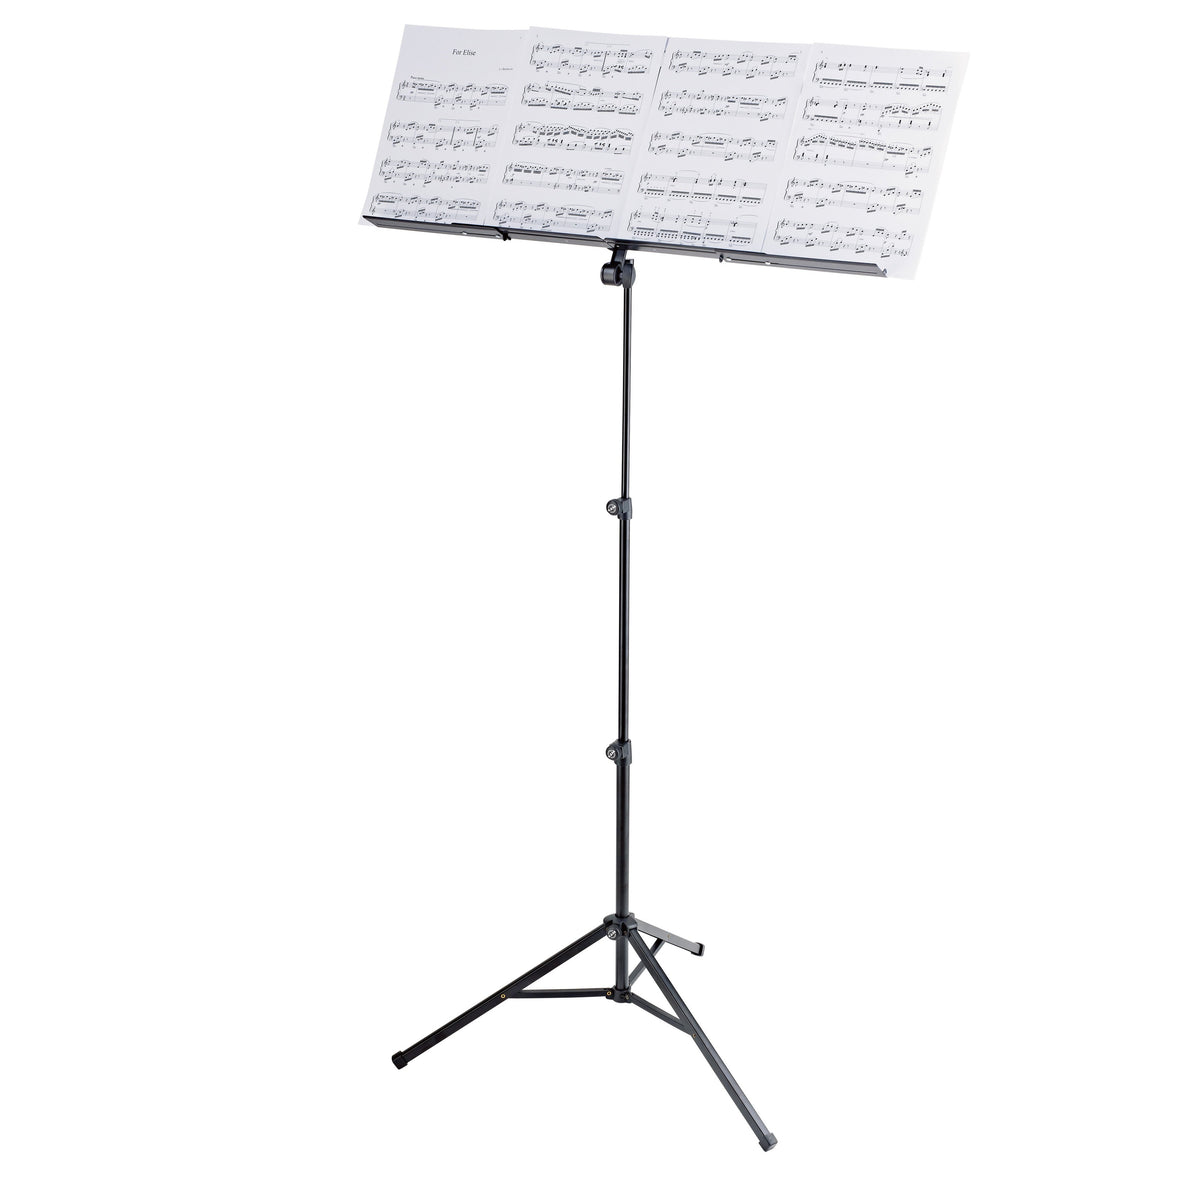 KÃ¶nig &amp; Meyer - 10062 Topline Music Stand &lt;Robby Plus&gt; with Expandable &amp; Collapsible Desk-Music Stand-KÃ¶nig &amp; Meyer-Music Elements